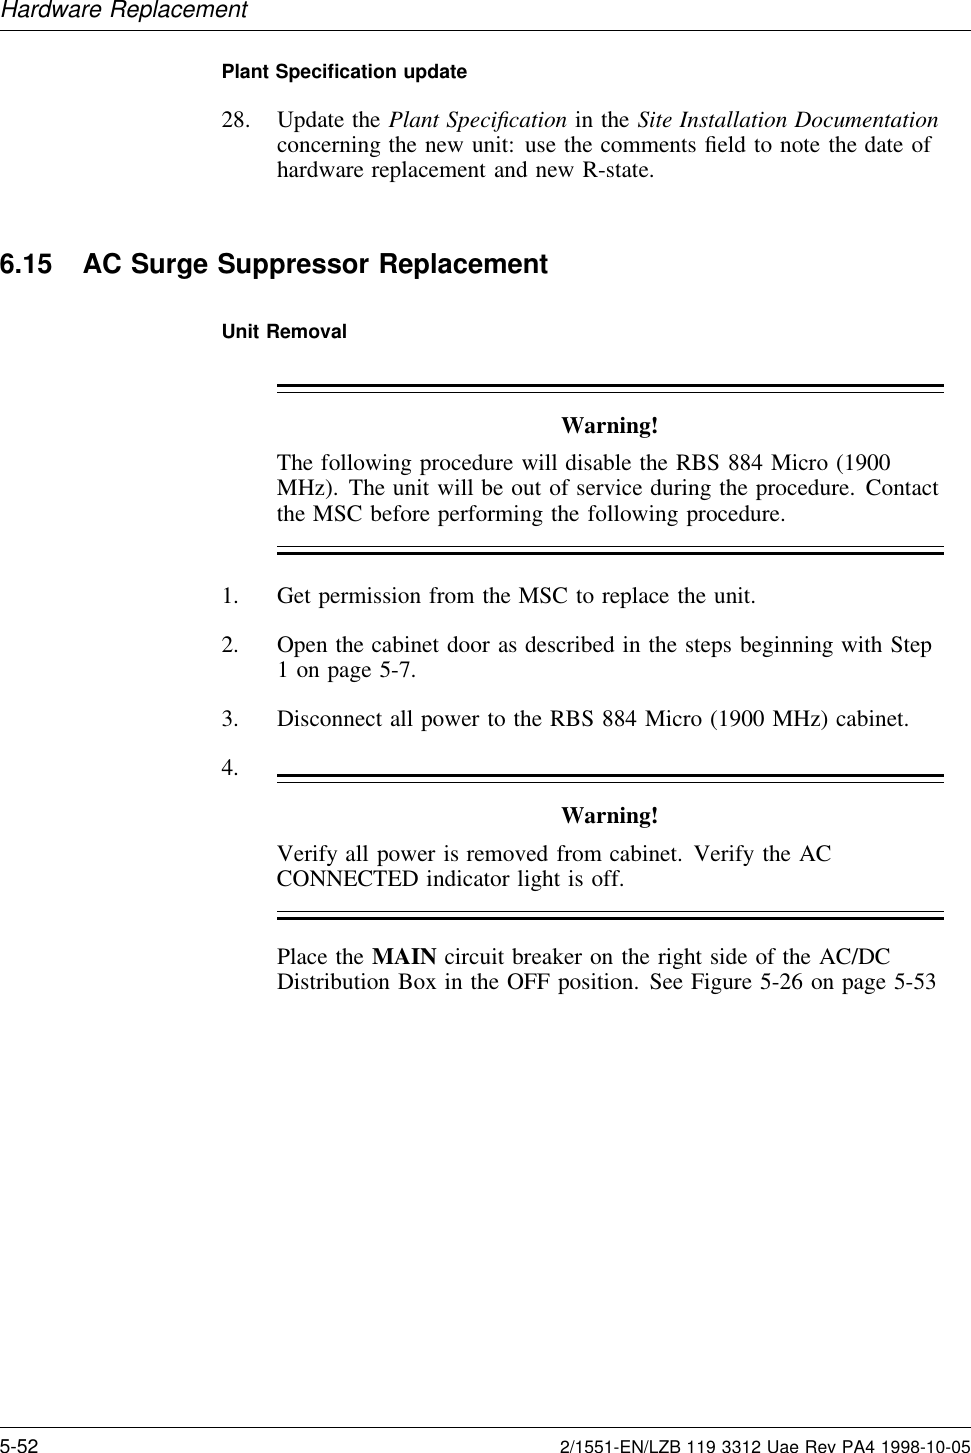 Hardware ReplacementPlant Speciﬁcation update28. Update the Plant Speciﬁcation in the Site Installation Documentationconcerning the new unit: use the comments ﬁeld to note the date ofhardware replacement and new R-state.6.15 AC Surge Suppressor ReplacementUnit RemovalWarning!The following procedure will disable the RBS 884 Micro (1900MHz). The unit will be out of service during the procedure. Contactthe MSC before performing the following procedure.1. Get permission from the MSC to replace the unit.2. Open the cabinet door as described in the steps beginning with Step1 on page 5-7.3. Disconnect all power to the RBS 884 Micro (1900 MHz) cabinet.4.Warning!Verify all power is removed from cabinet. Verify the ACCONNECTED indicator light is off.Place the MAIN circuit breaker on the right side of the AC/DCDistribution Box in the OFF position. See Figure 5-26 on page 5-535-52 2/1551-EN/LZB 119 3312 Uae Rev PA4 1998-10-05